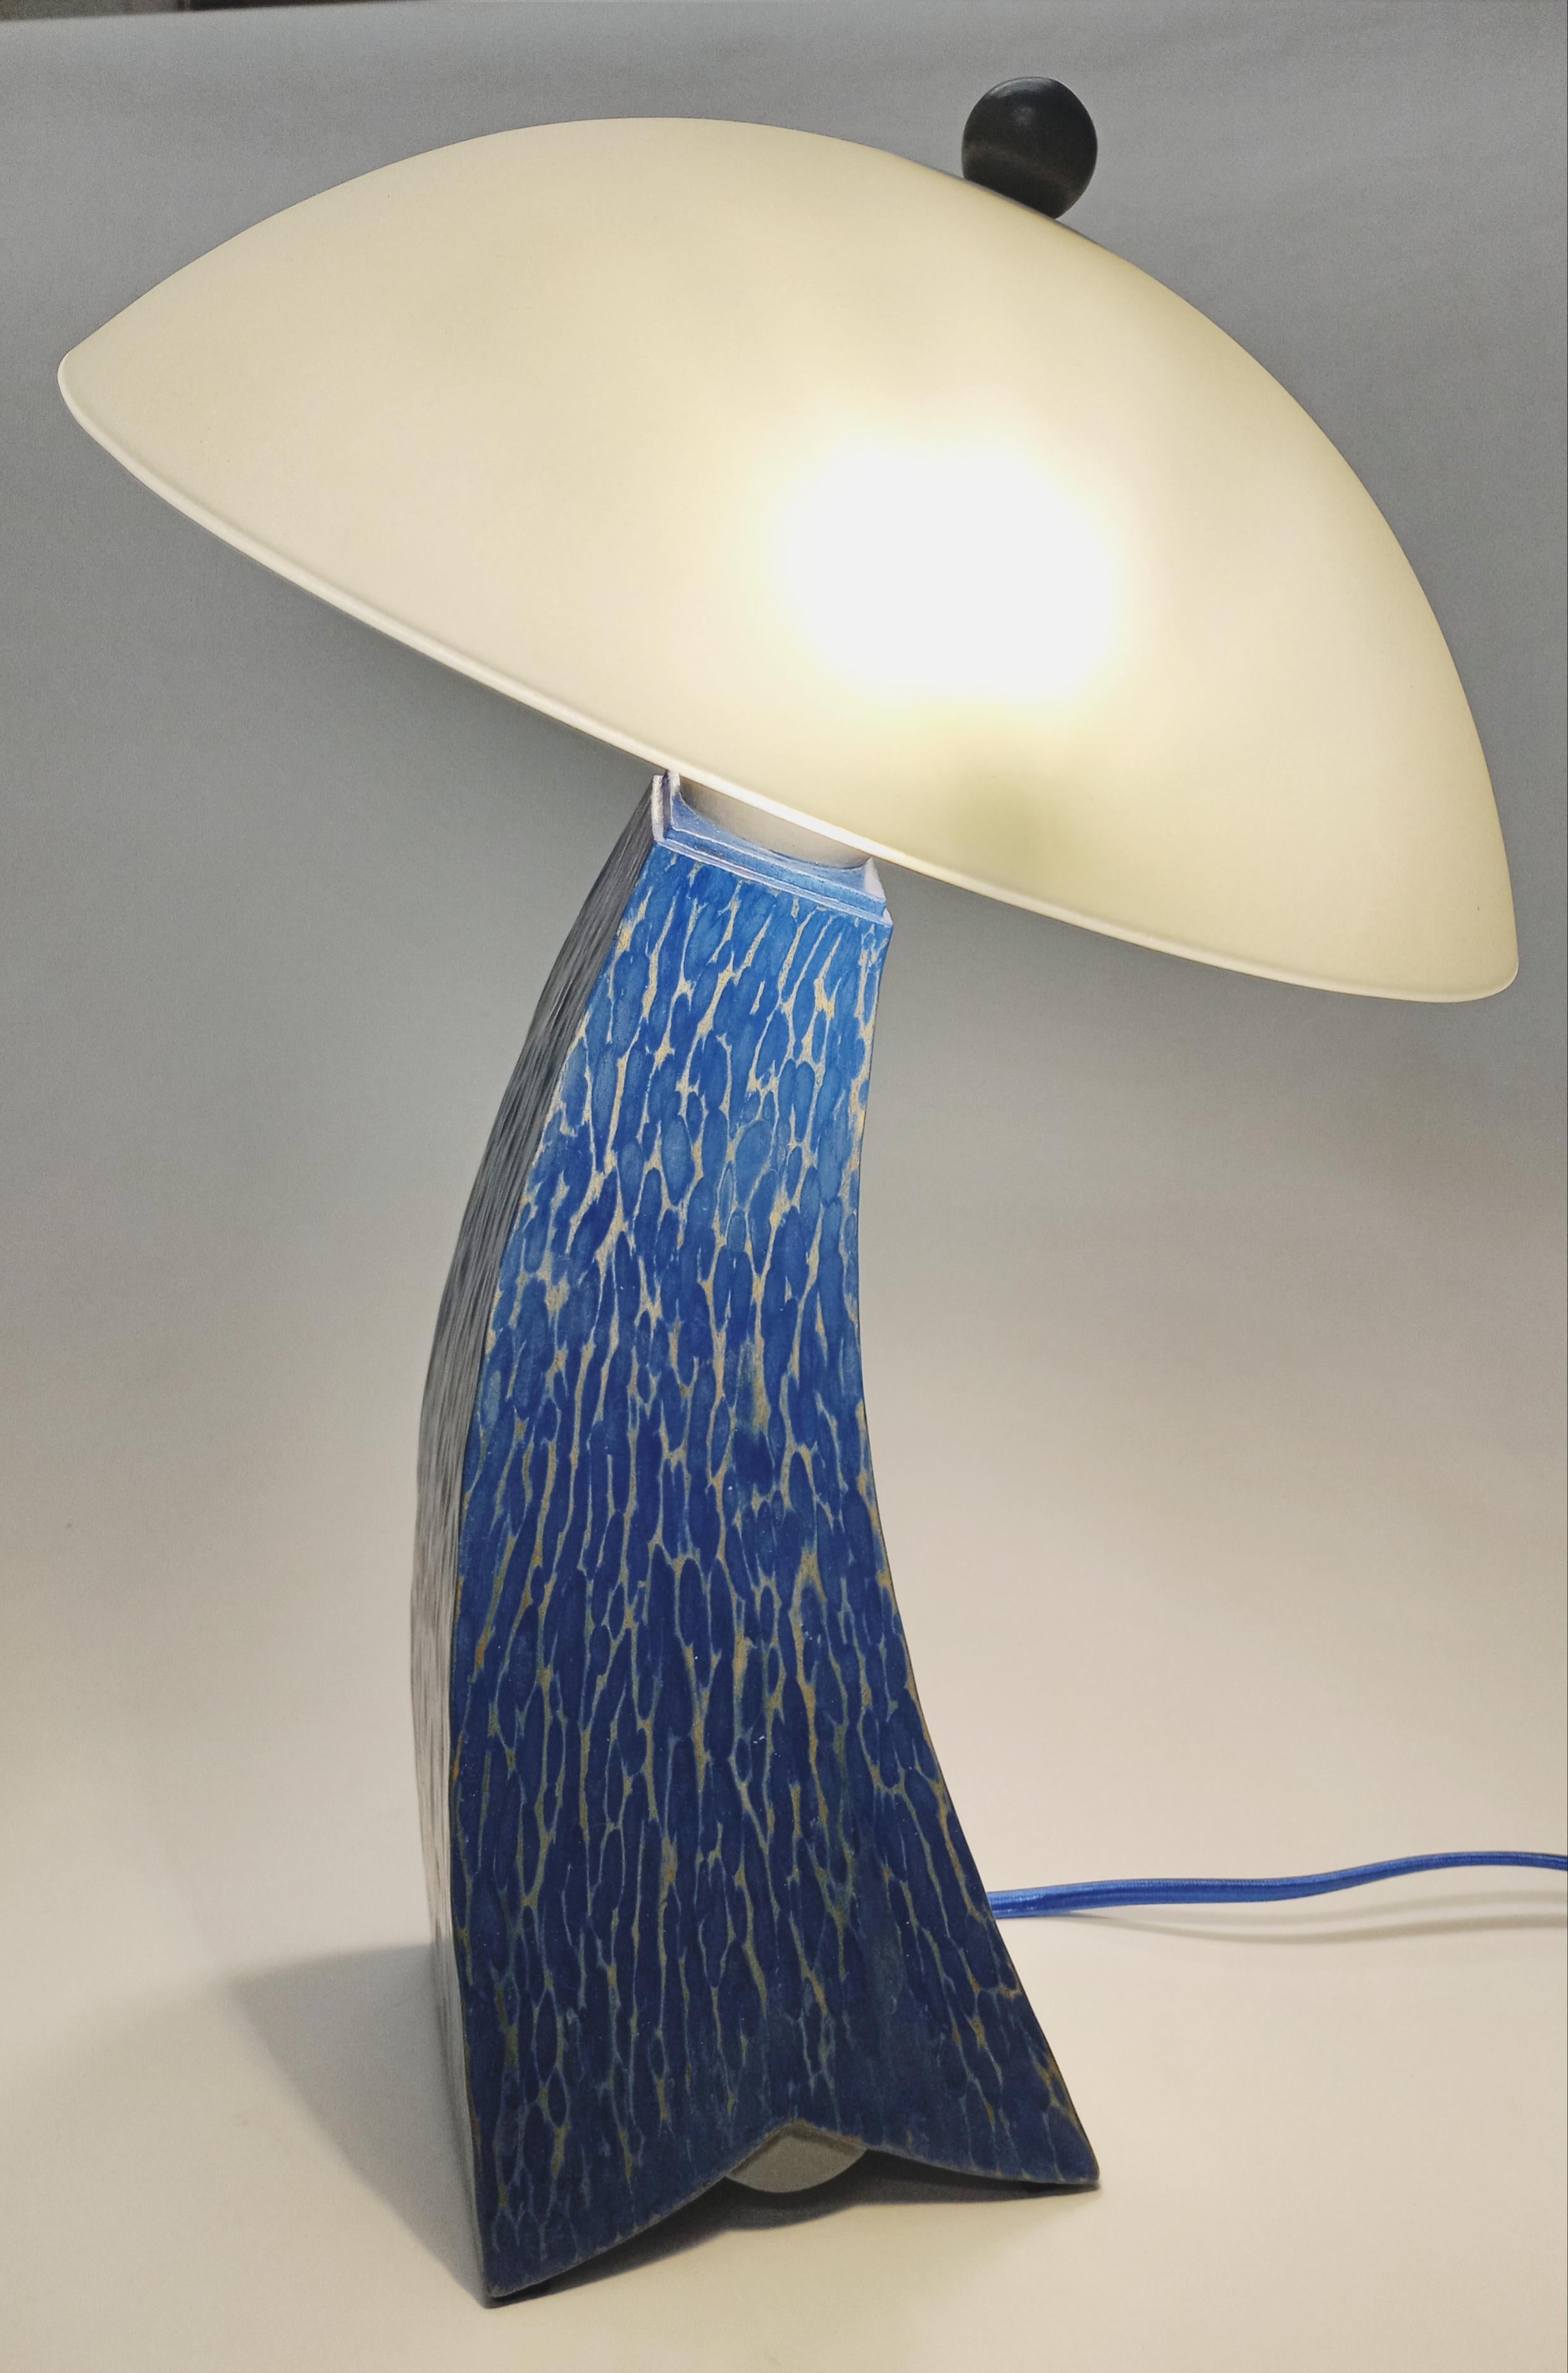 Hand-Carved Table lamp min blue and grey textured milk painted jazz inspired design in stock For Sale